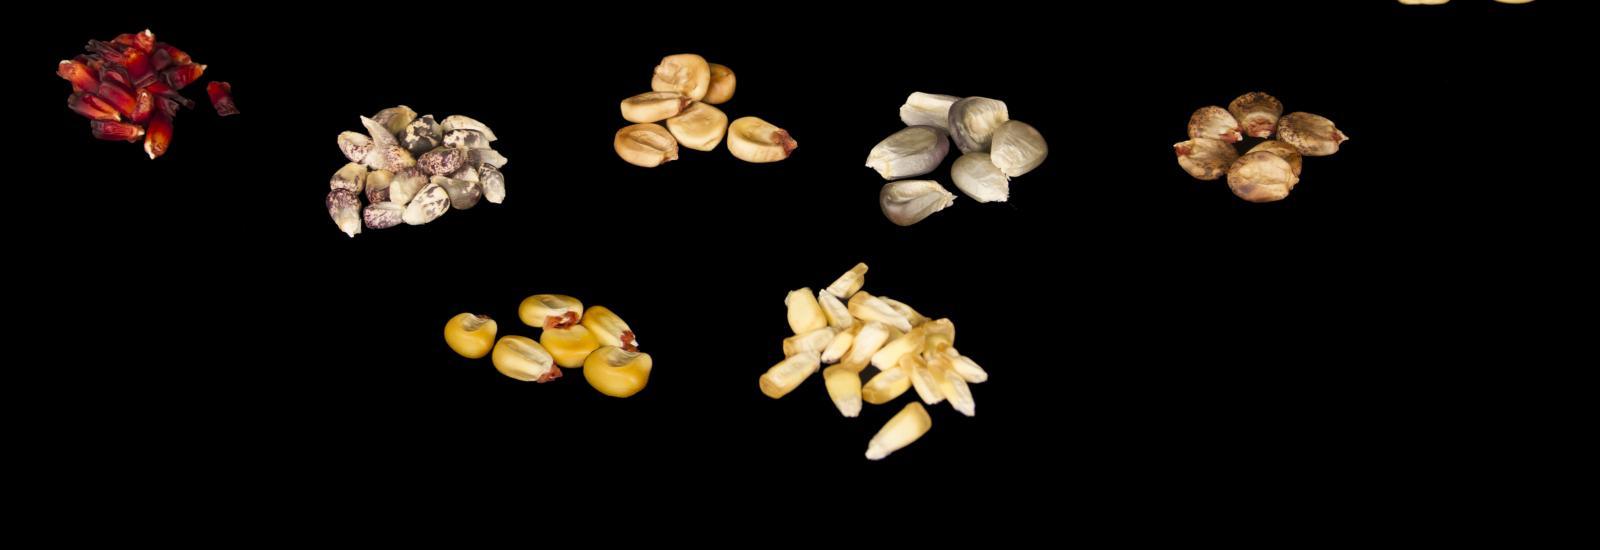 image of Andean varieties of maize